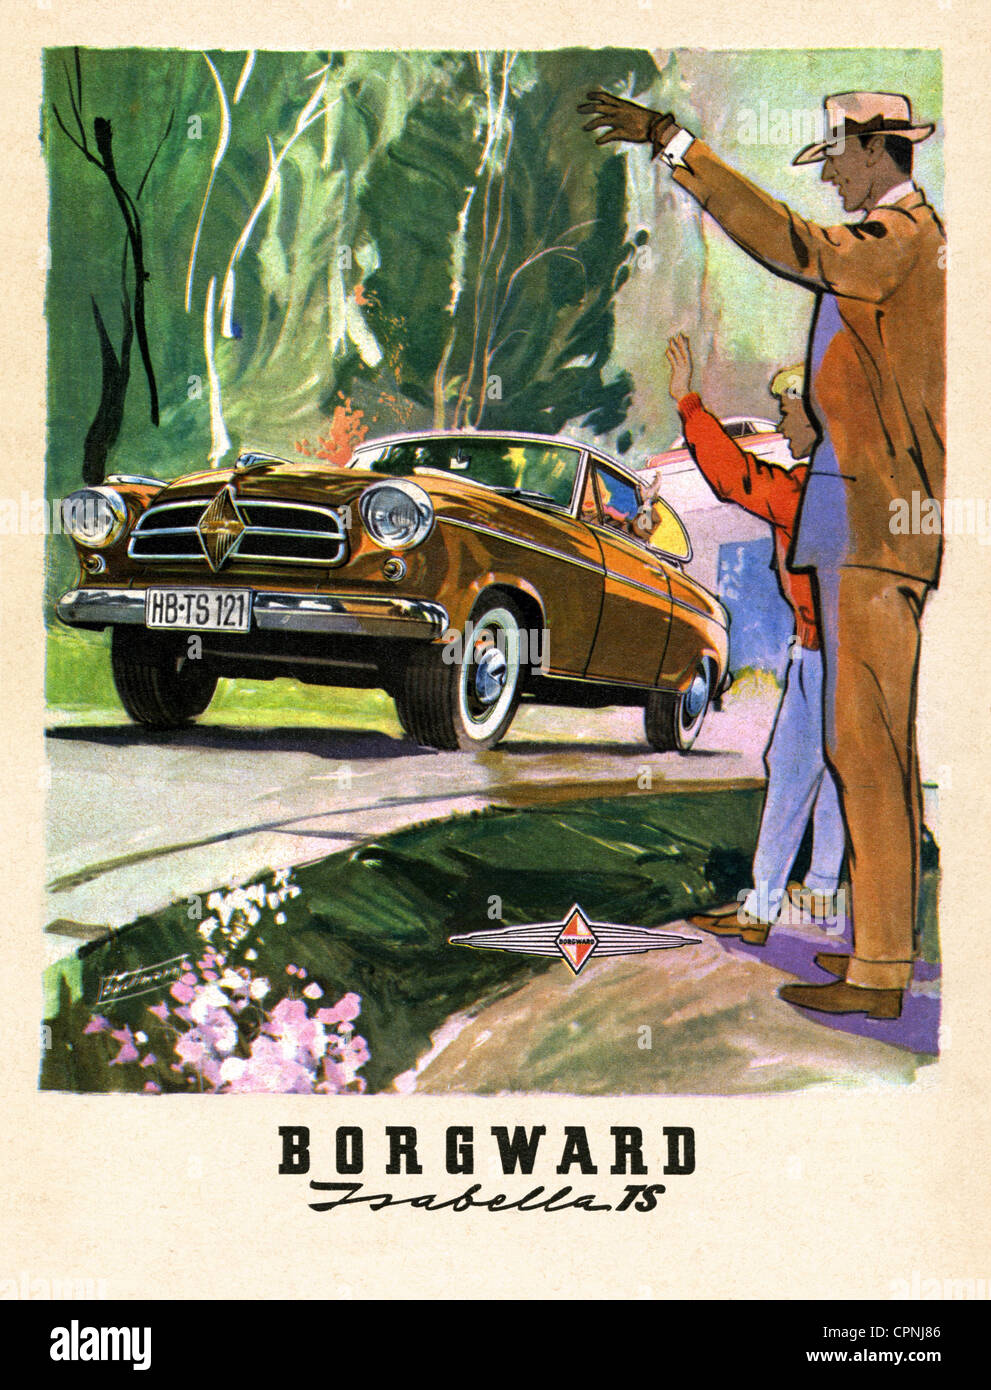 advertising, transport / transportation, Borgward Isabella TS, made by: Carl F. W. Borgward GmbH, automobile and engine works Bremen, limousine, engine: 75 horsepower, 4 cylinder, cylinder capacity: 1493 cubic centimetre, top speed: 150 kph, speedup from 0 on 100 kph in 18.5 sec., fuel consumption, 2l/100 km, Germany, 1959, Additional-Rights-Clearences-Not Available Stock Photo